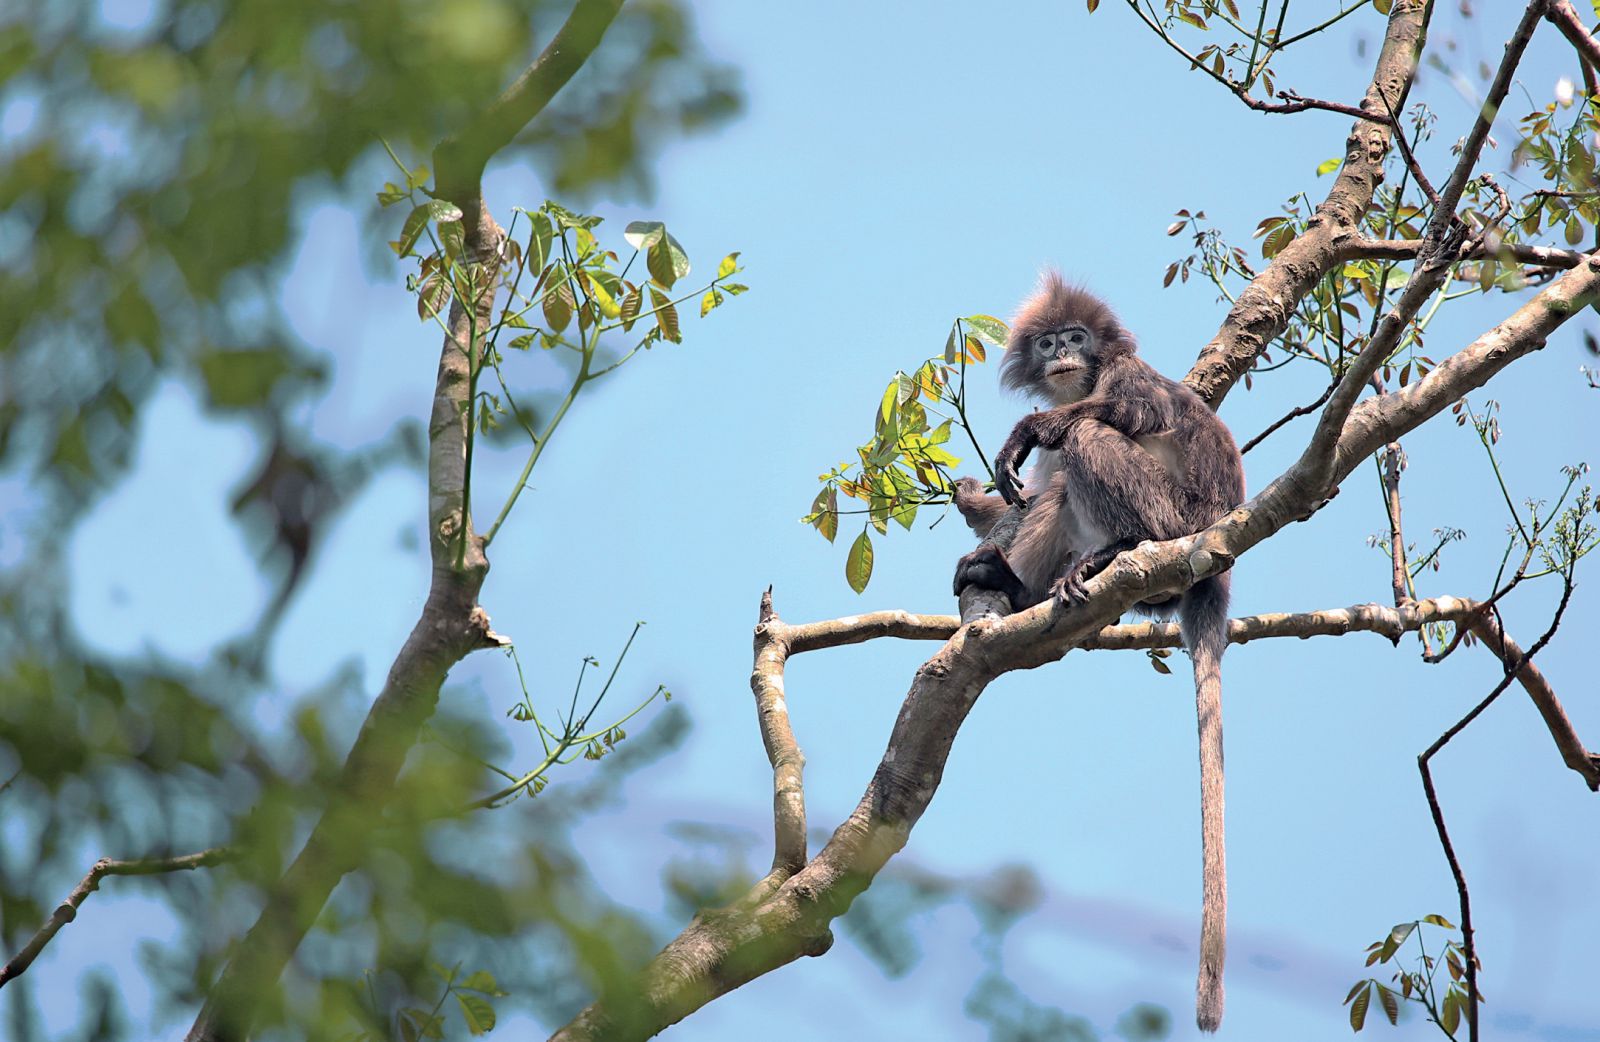 A Phayreâ€™s leaf monkey, also known as Phayreâ€™s langur, clings to his arboreal home in Tripura, Assam. Phayreâ€™s langurs live in groups on trees on the fringes of Tripuraâ€™s tea estates; they rarely descend from the safety of the canopies, but lately are being forced to due to deforestation.